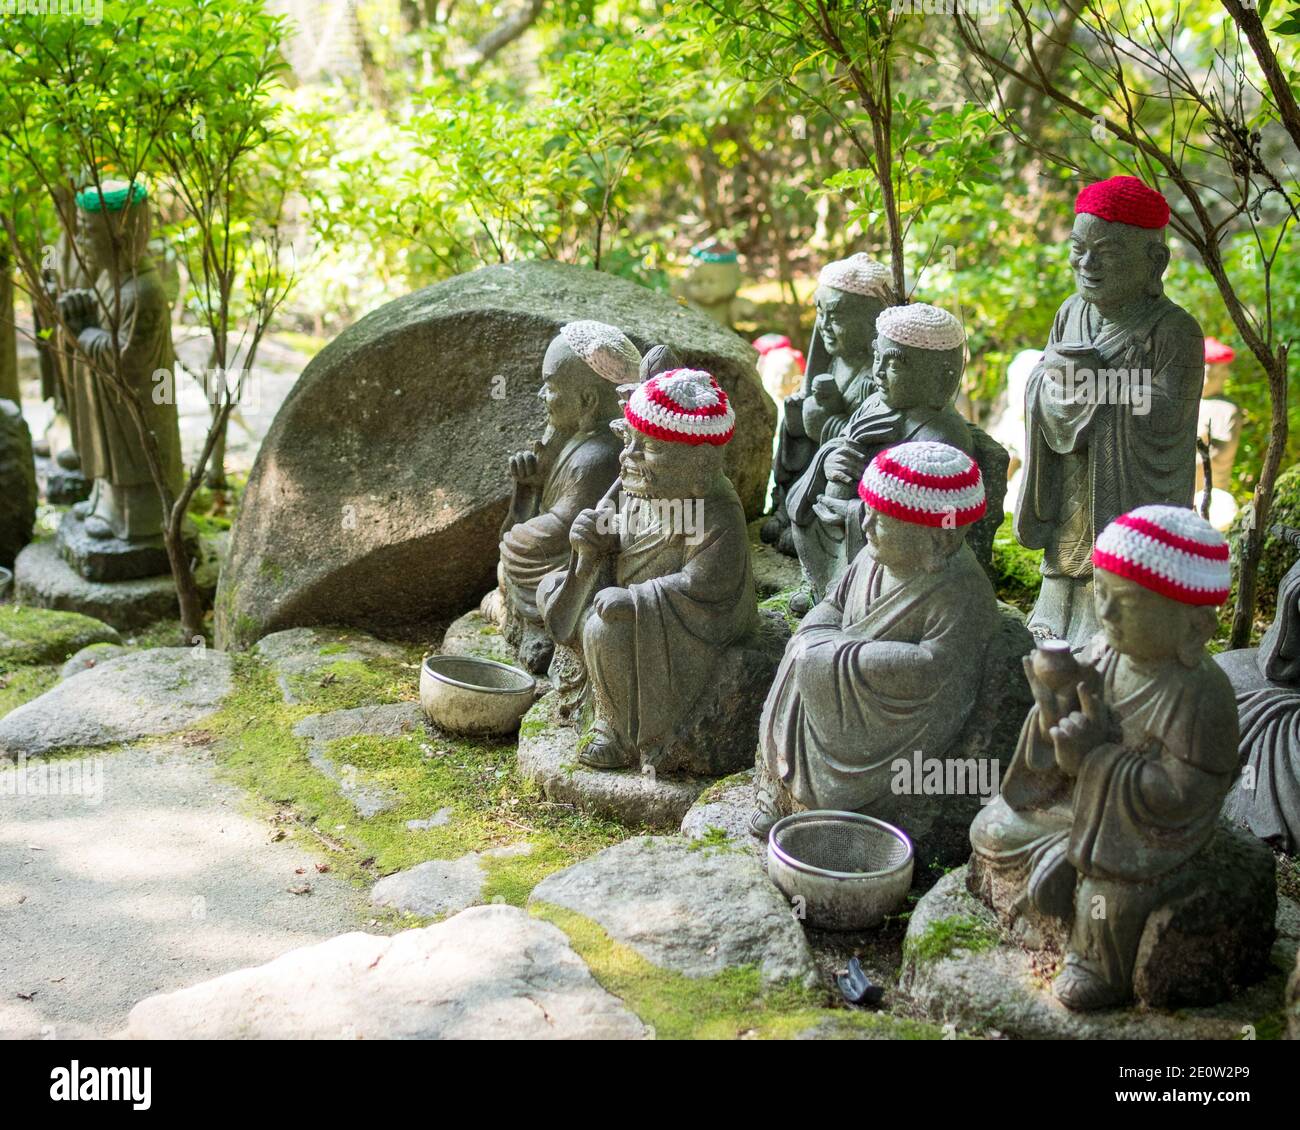 Statues of the original followers of Buddha (called Shaka Nyorai in Japan), with knitted caps at Daisho-in Temple (Daishoin Temple), Miyajima, Japan. Stock Photo